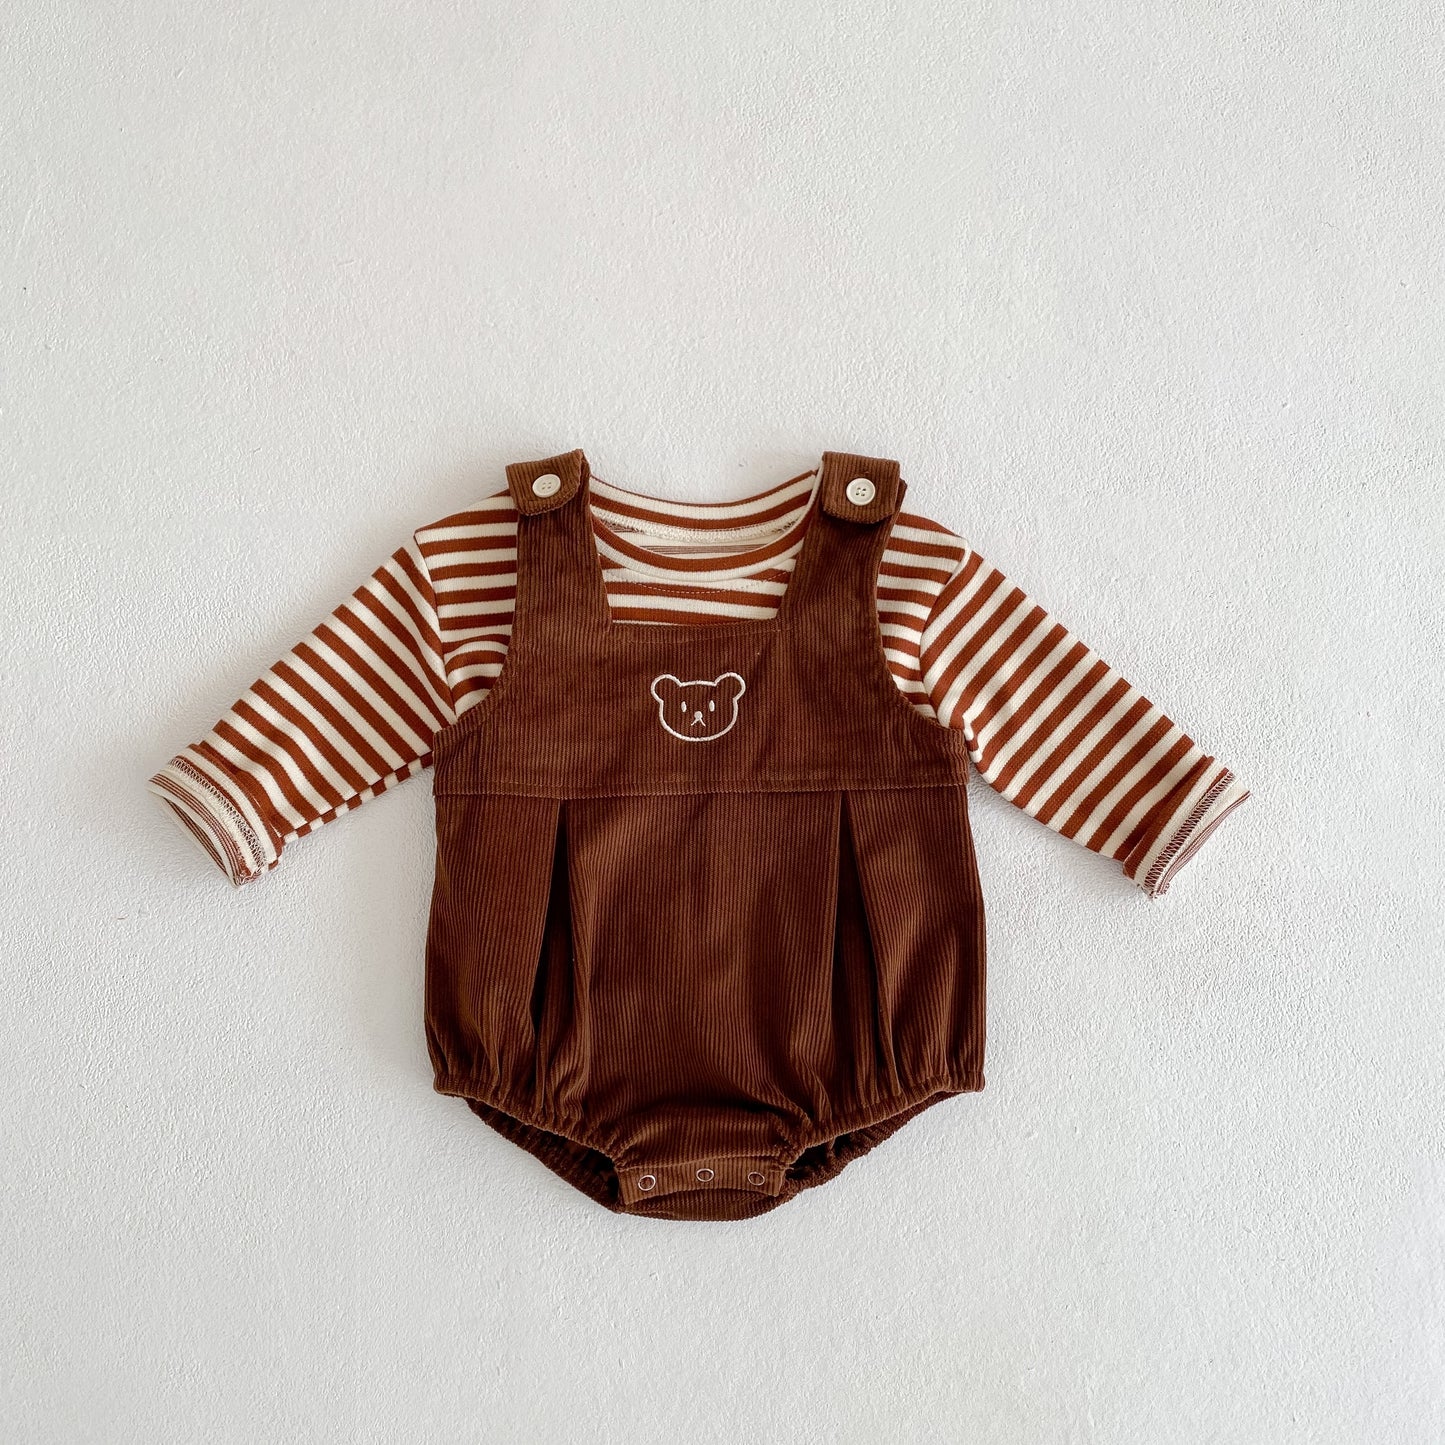 2PCS Baby/Toddler Autumn Romper Set (size: 3months-3years)